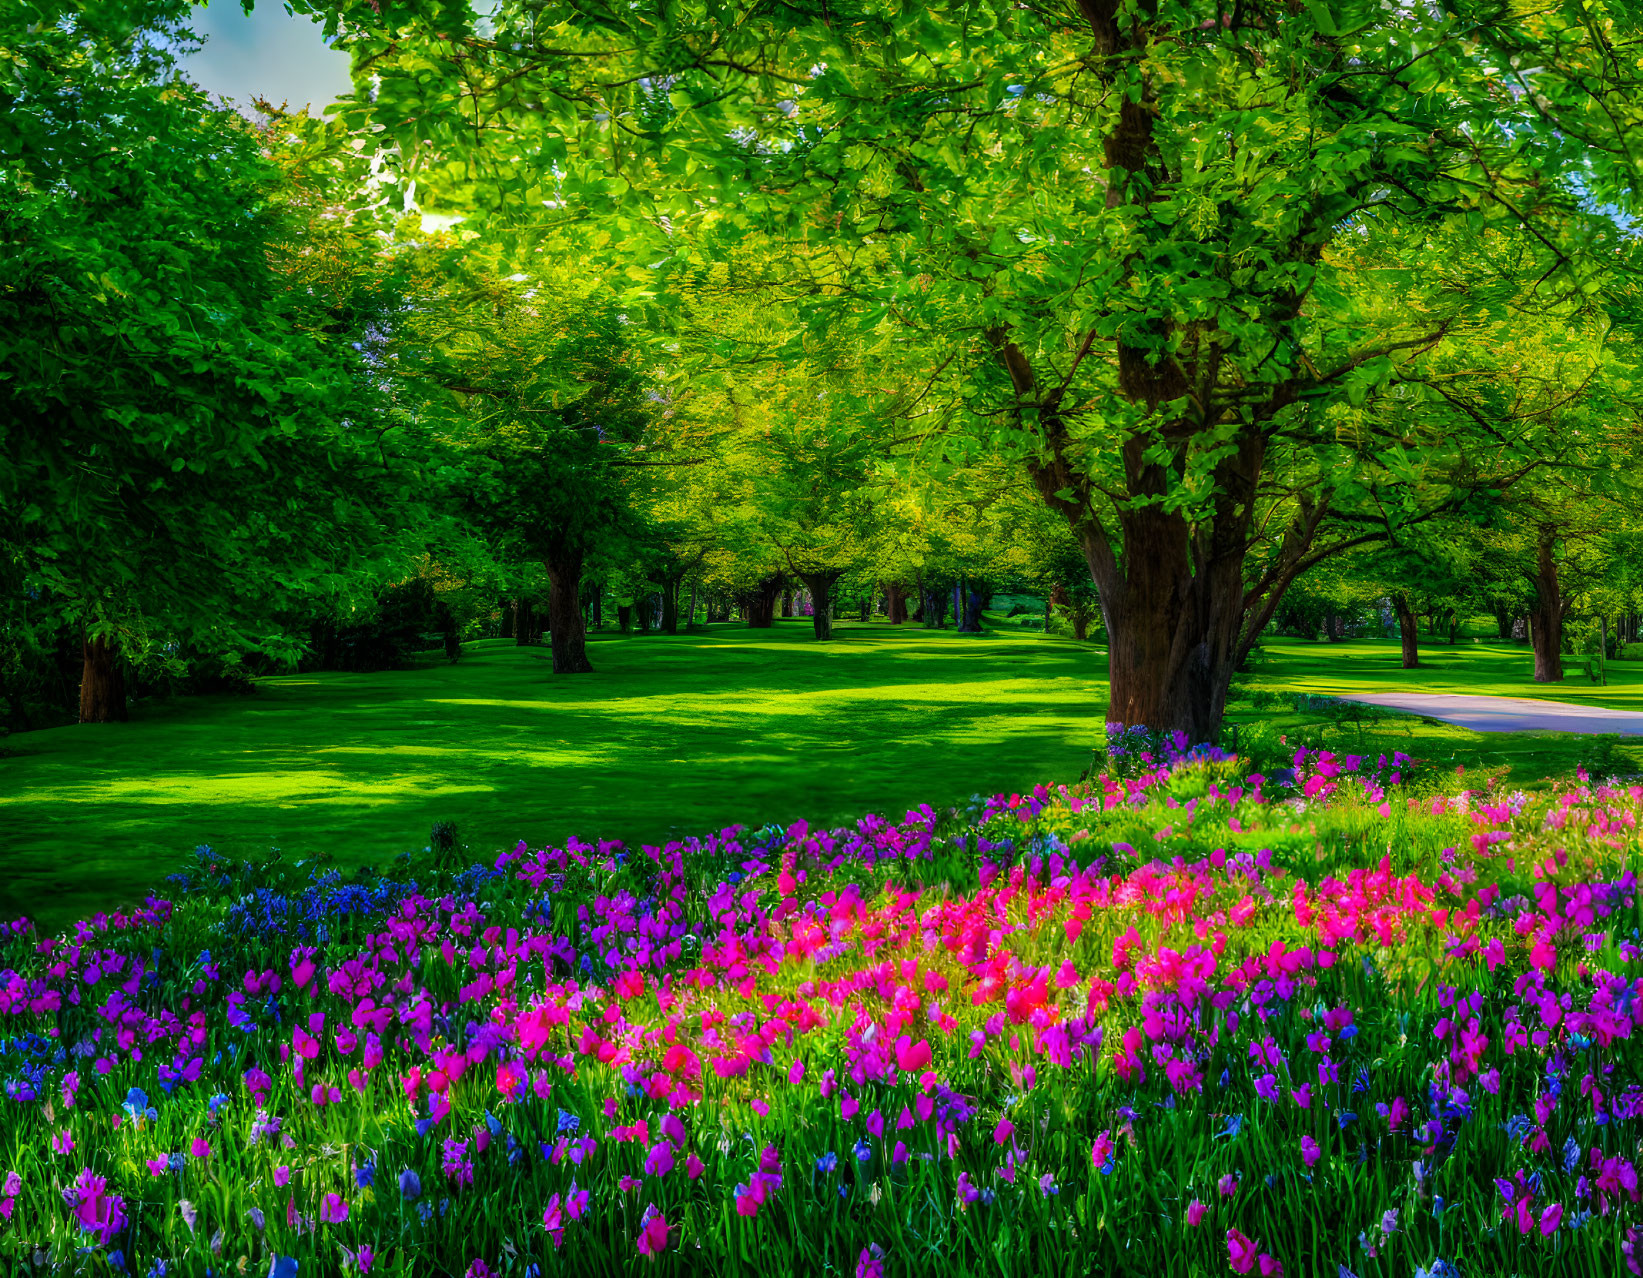 Blooming purple and pink tulips under green trees in a sunny park